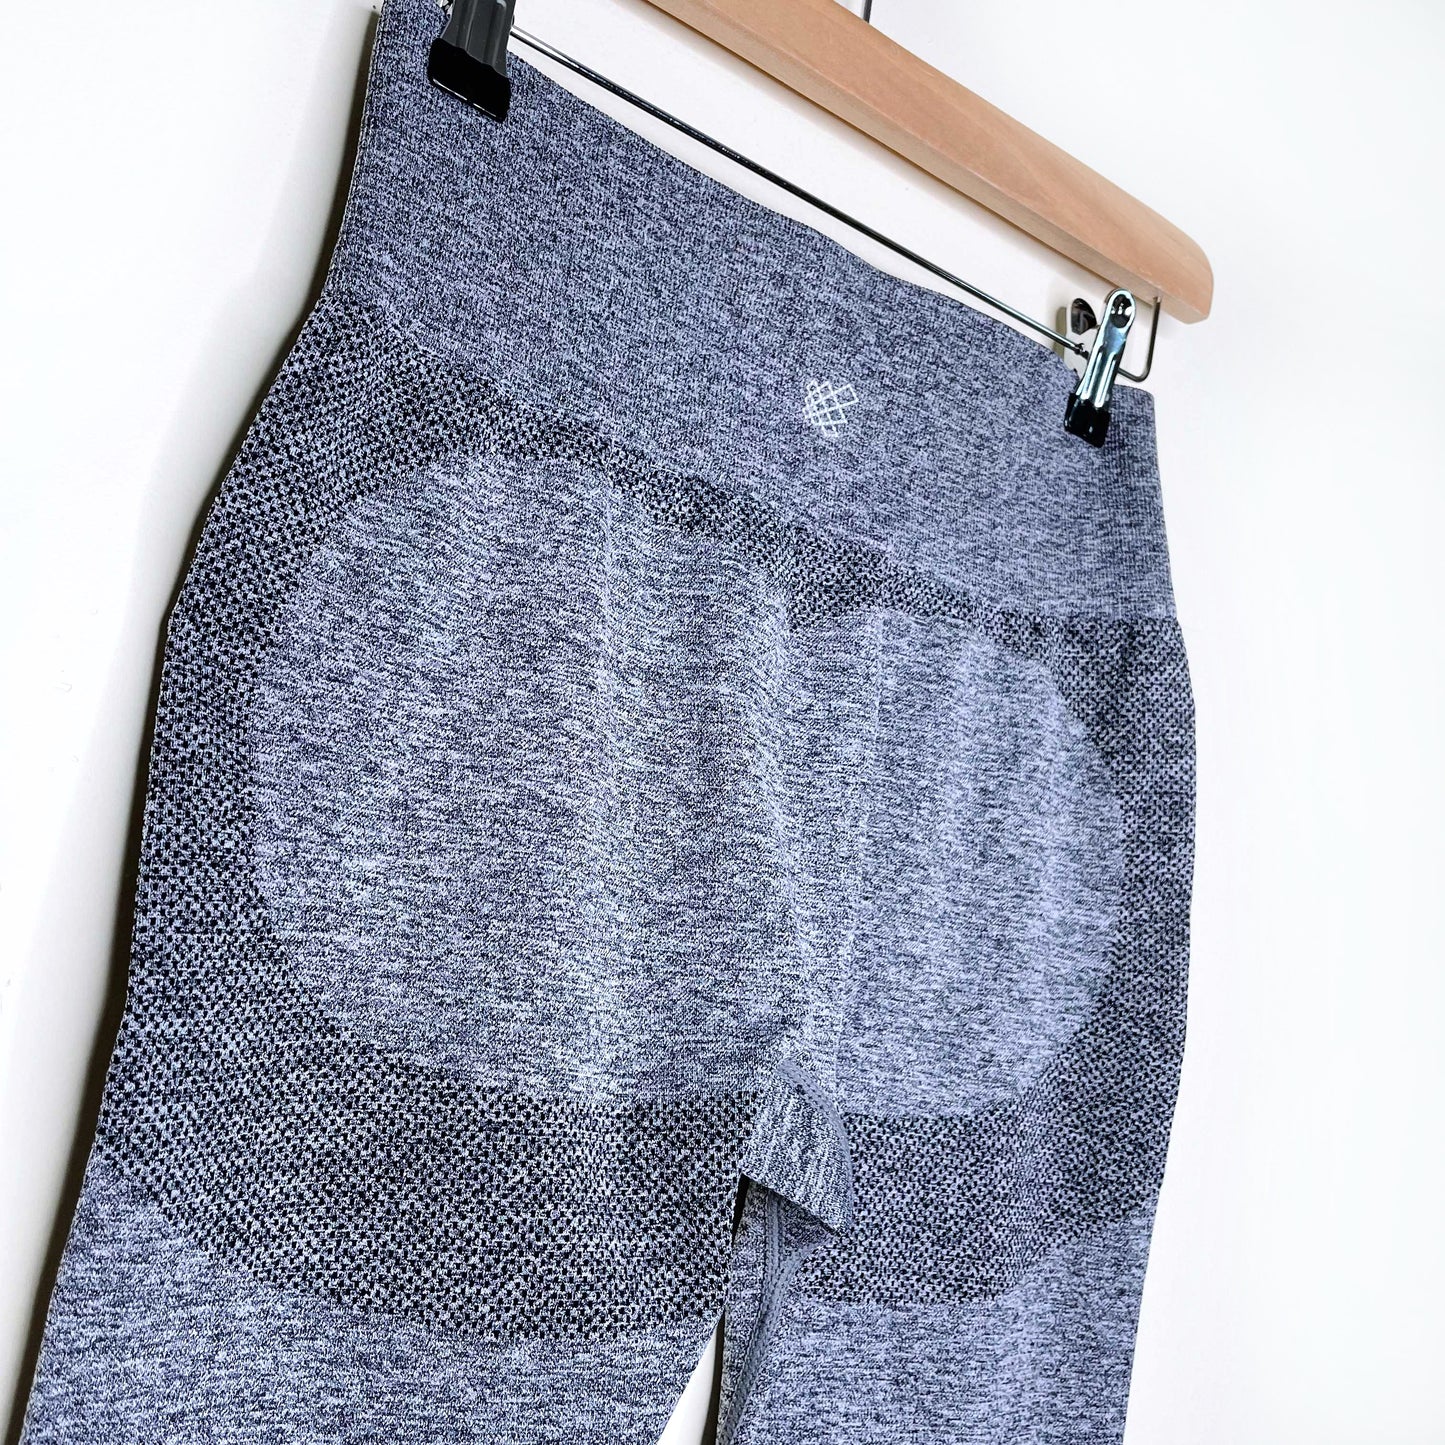 jed north supple seamless grey leggings - size xs/s